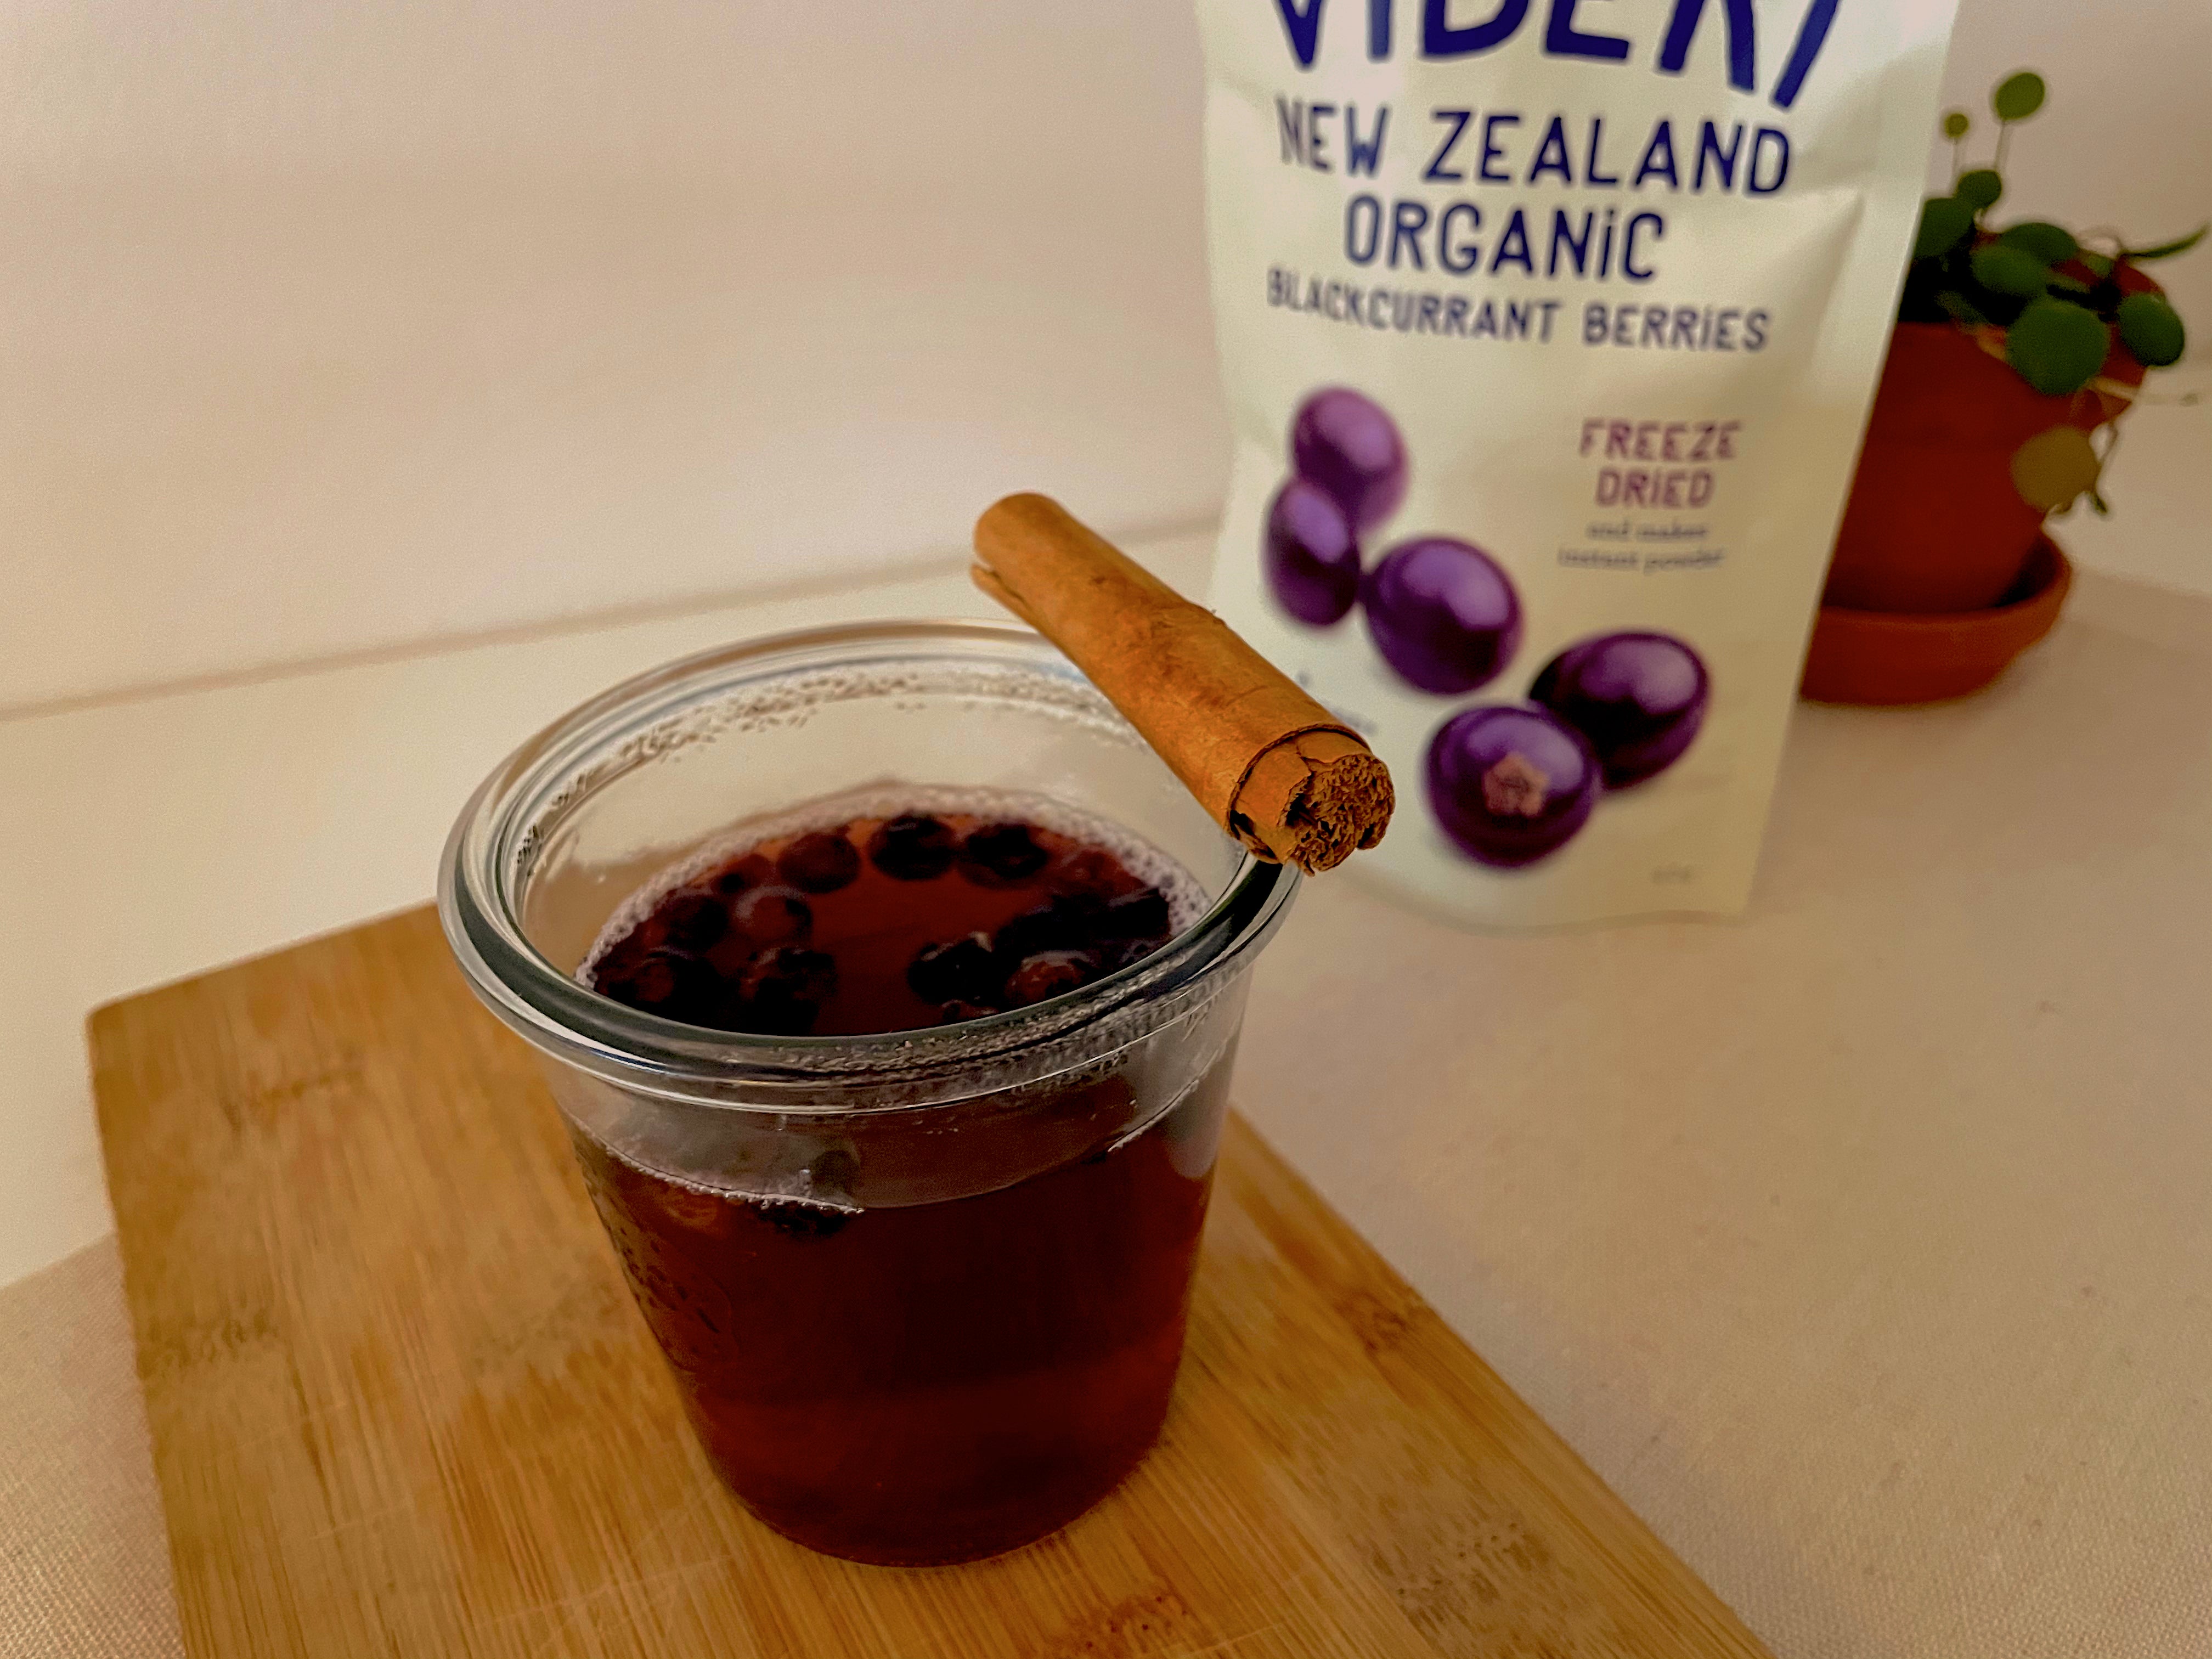 Blackcurrant Soother Tea with Cinnamon Stick and ViBERi Pack